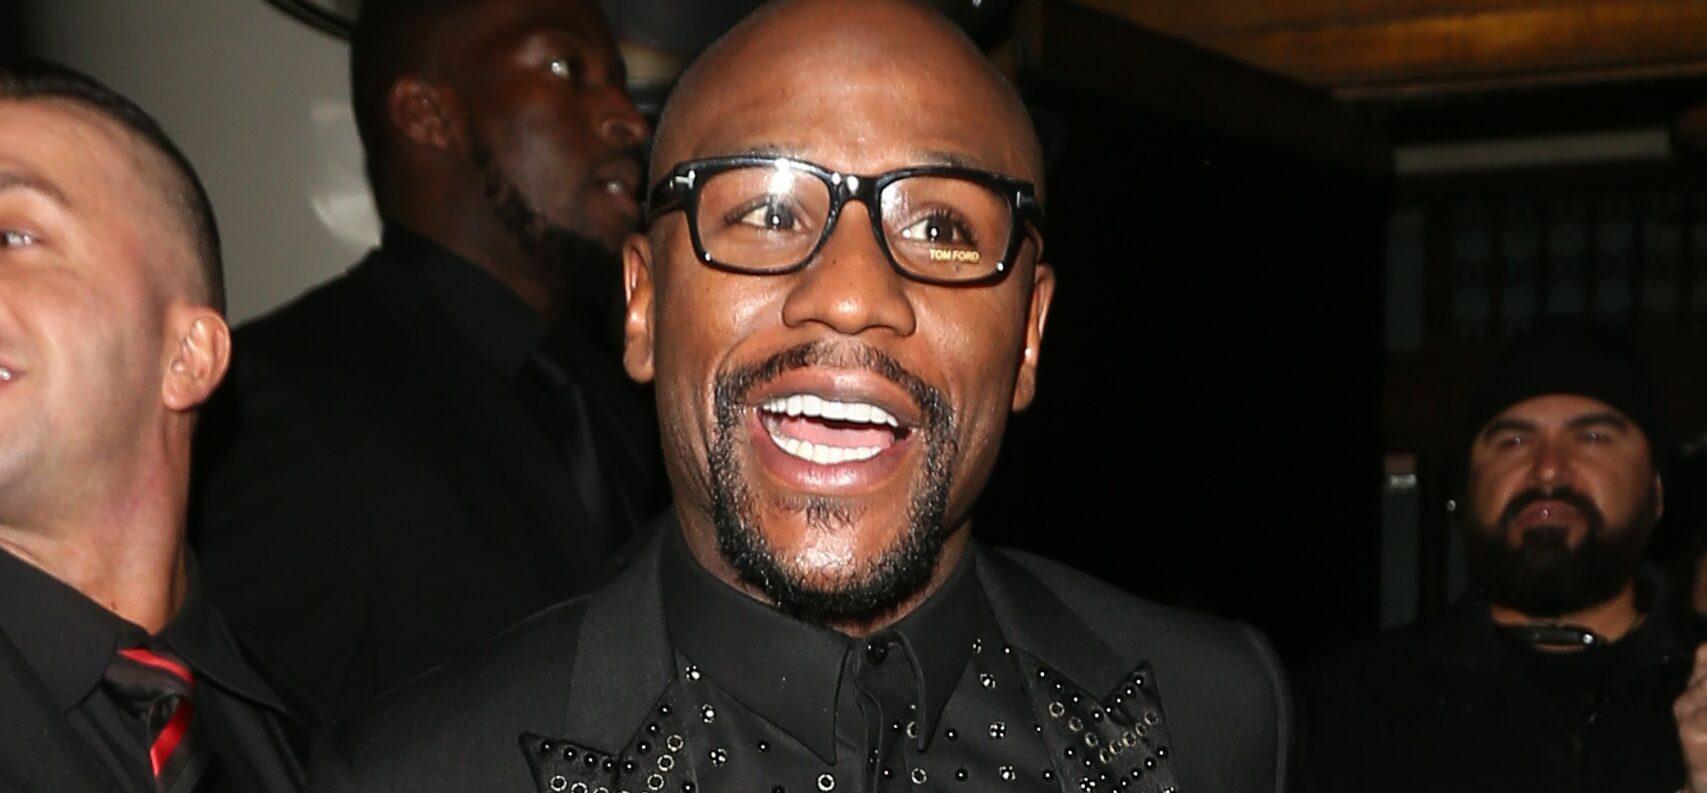 Floyd Mayweather Flaunts Super Bowl VIP Suite Purchase For 34 Lucky Friends & Hefty Tax Bill